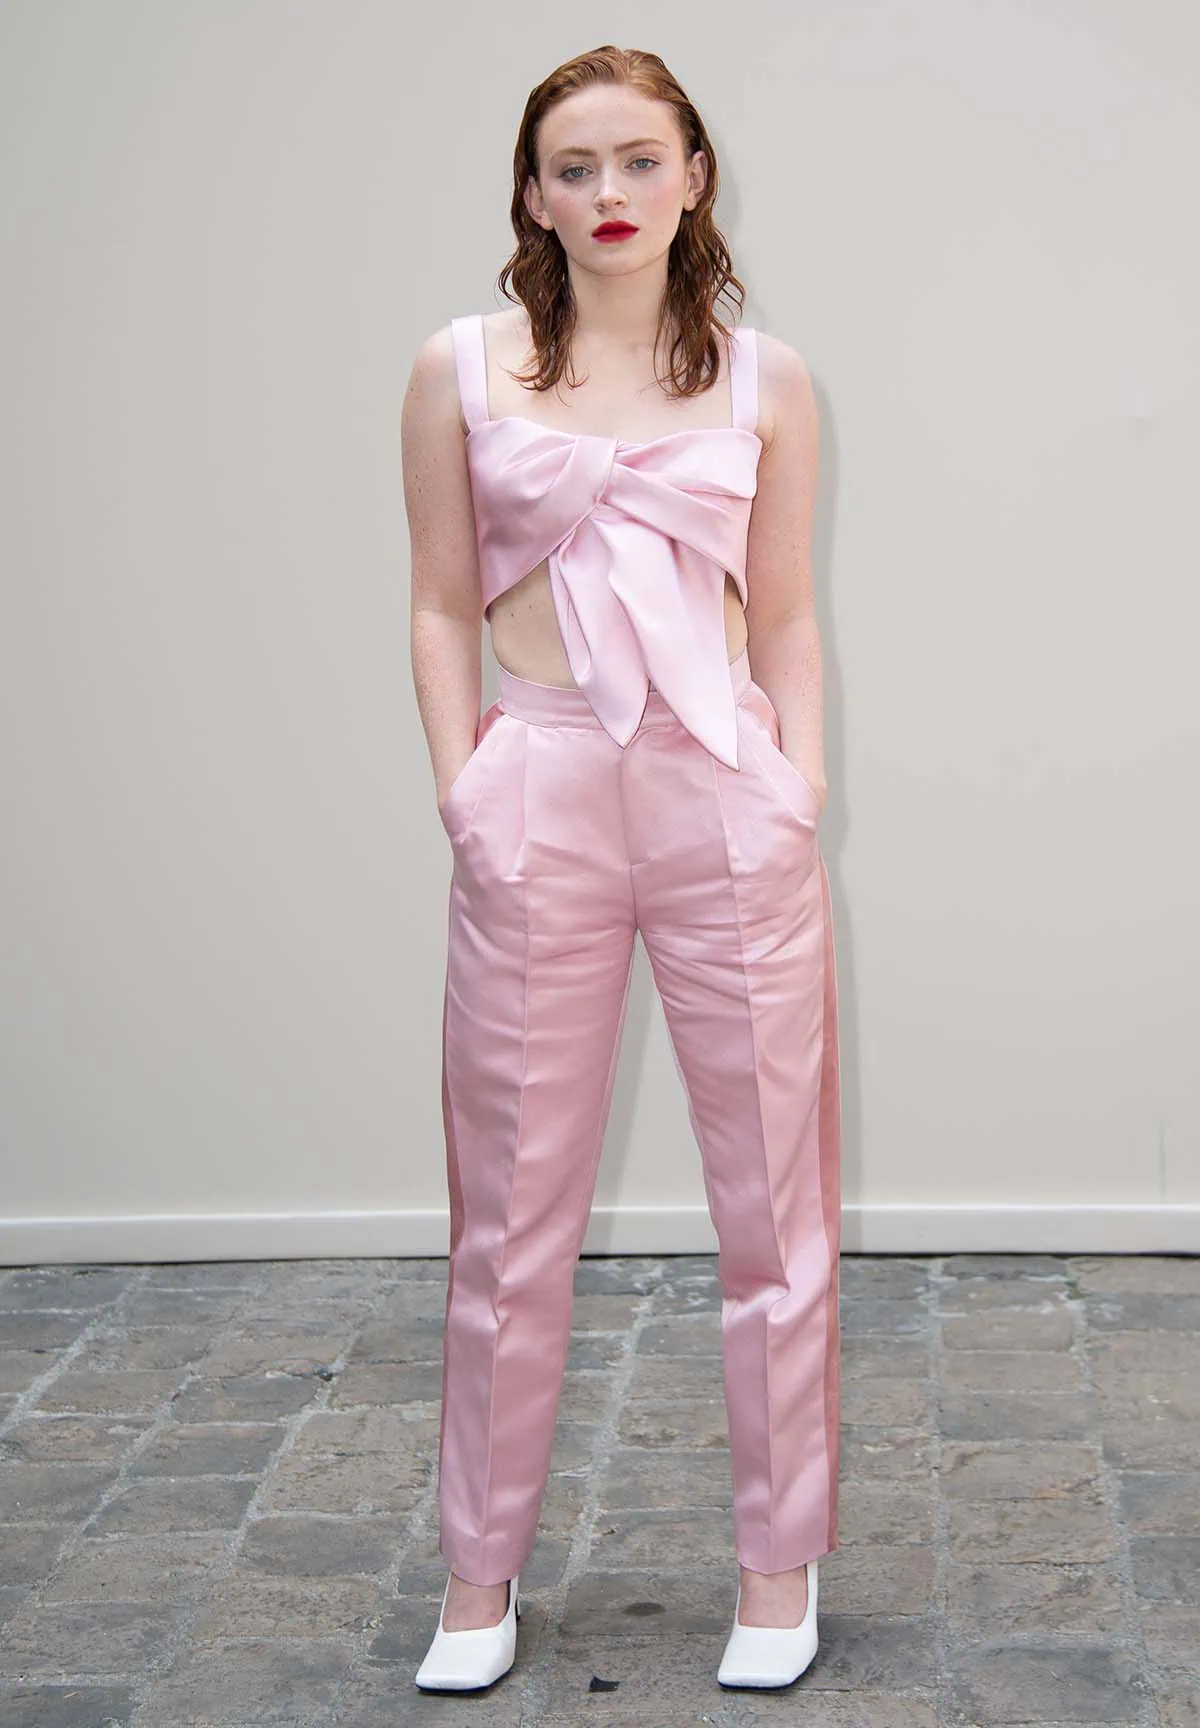 Sadie Sink wears a coquette pink bralette, twisted to form a large bow, and teams it with matching pink tapered pants at Ashi Studio Haute Couture Fall/Winter fashion presentation